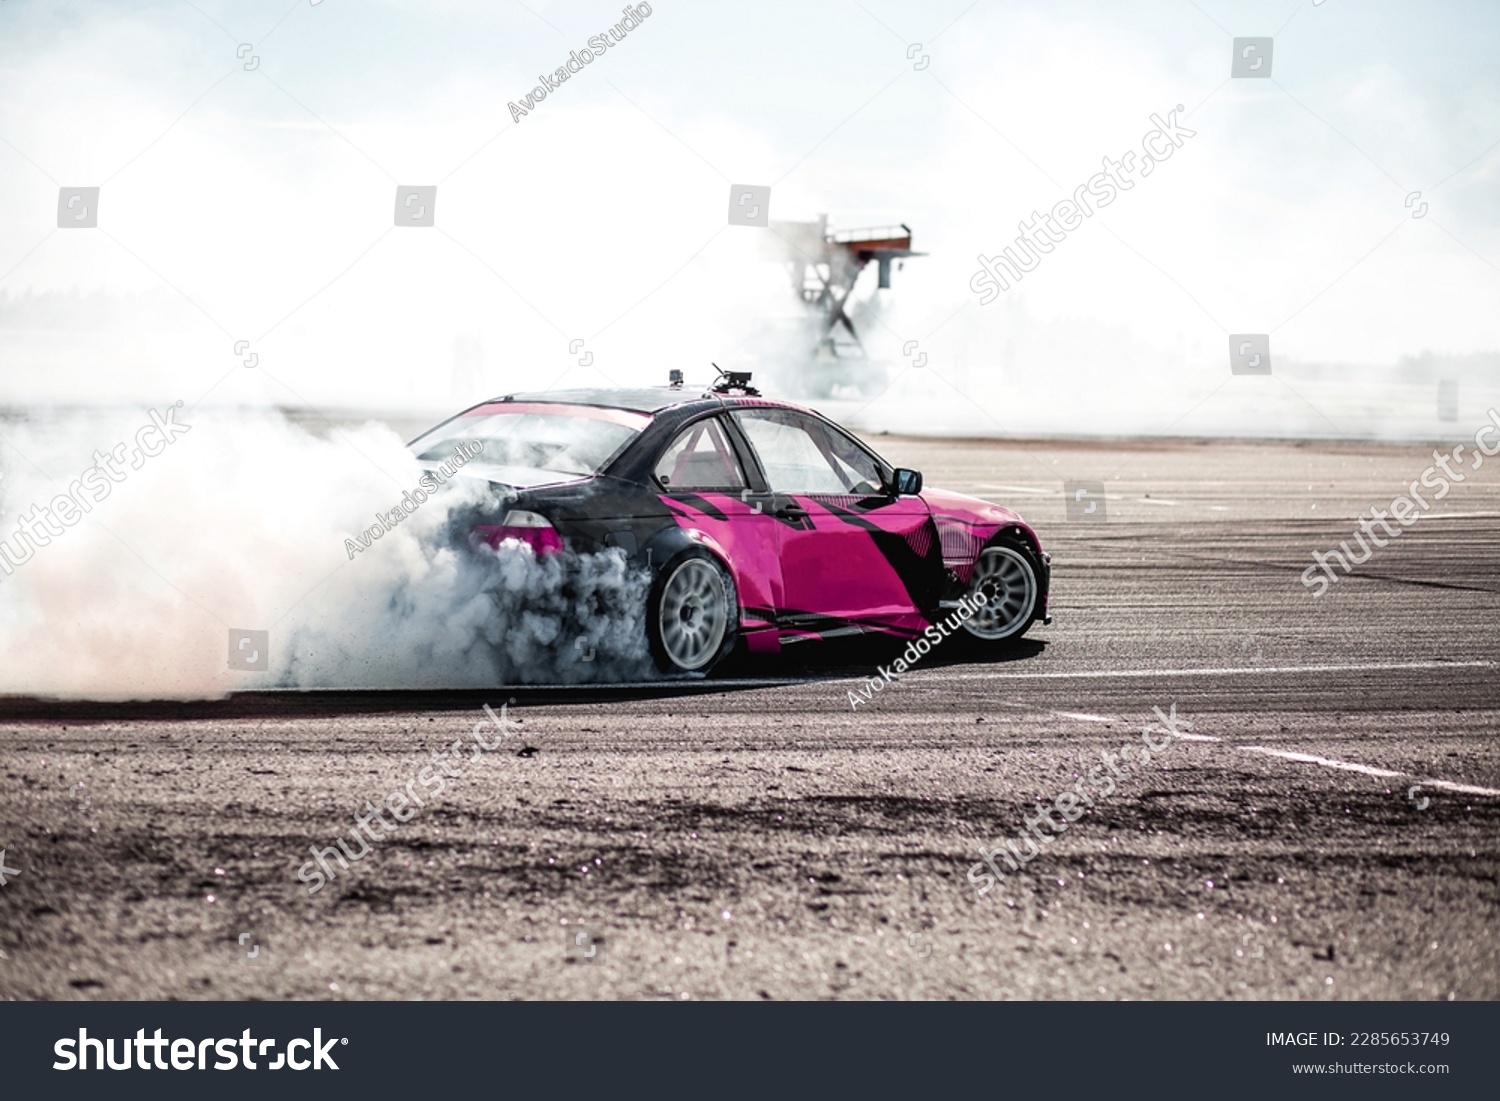 pink car drifting, Blurred image diffusion race drift car with lots of smoke from burning tires on speed track #2285653749